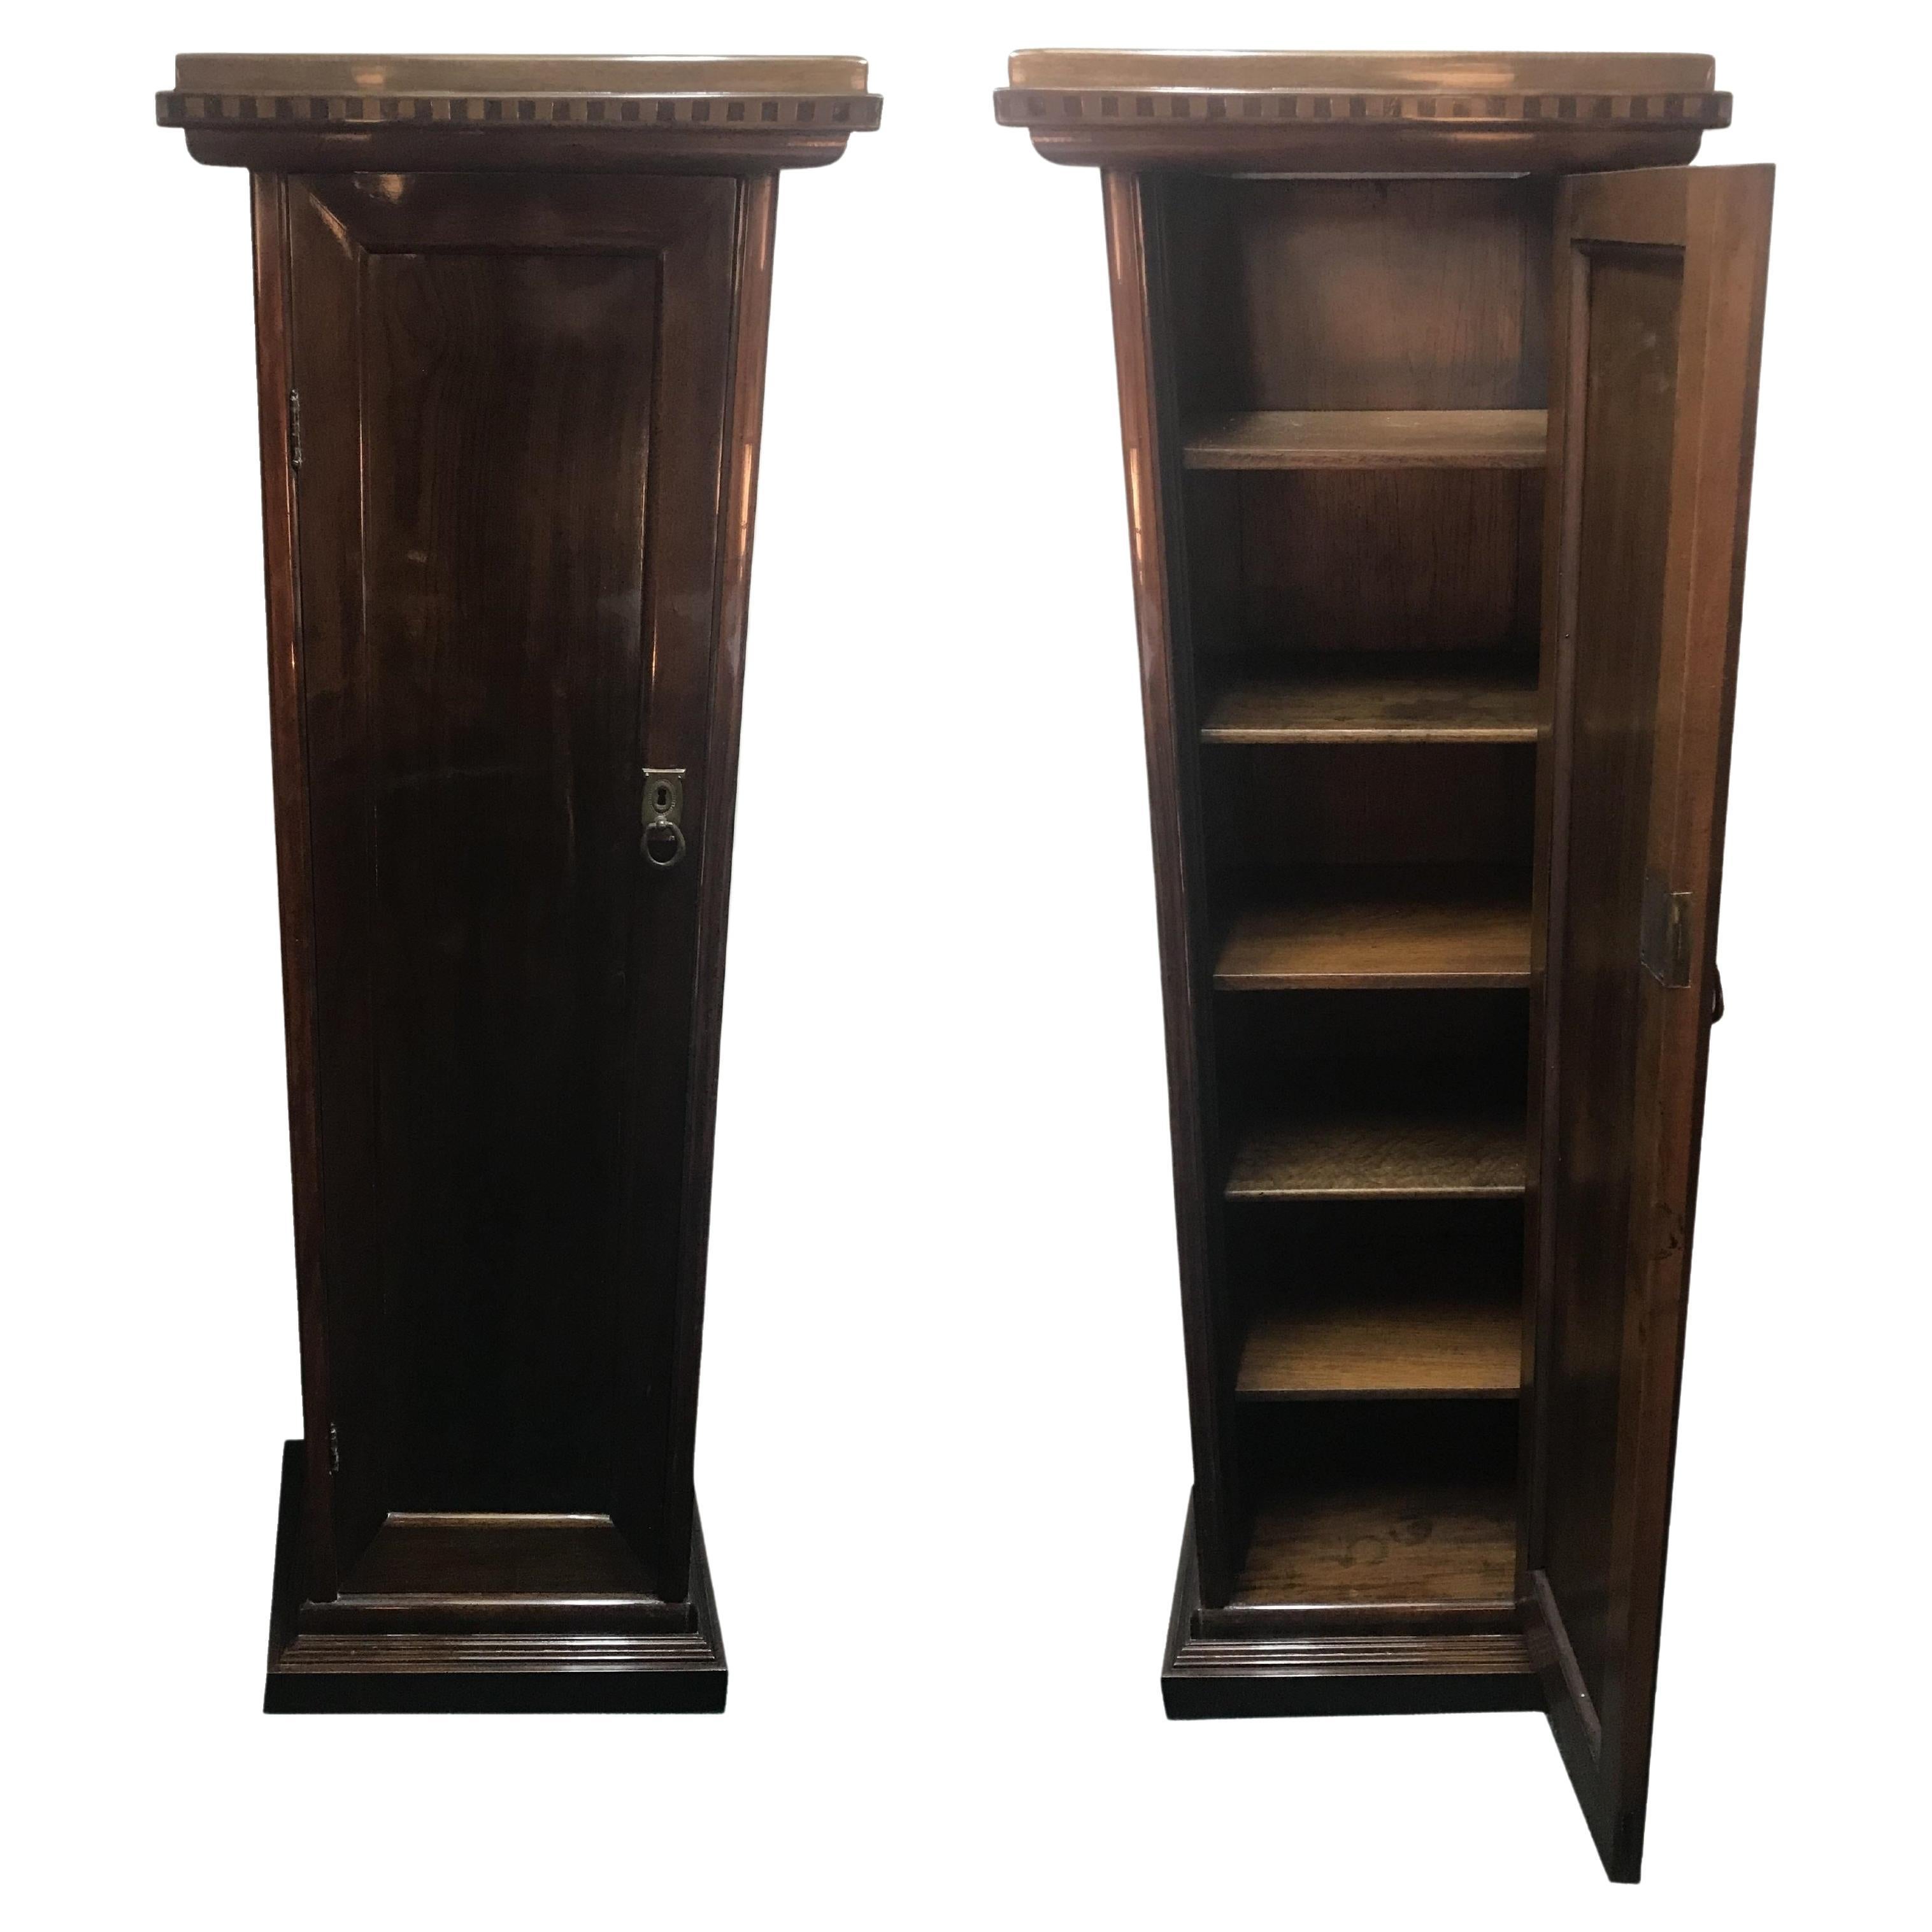 Pair of Art Deco Columns with shelves, 1930, French For Sale